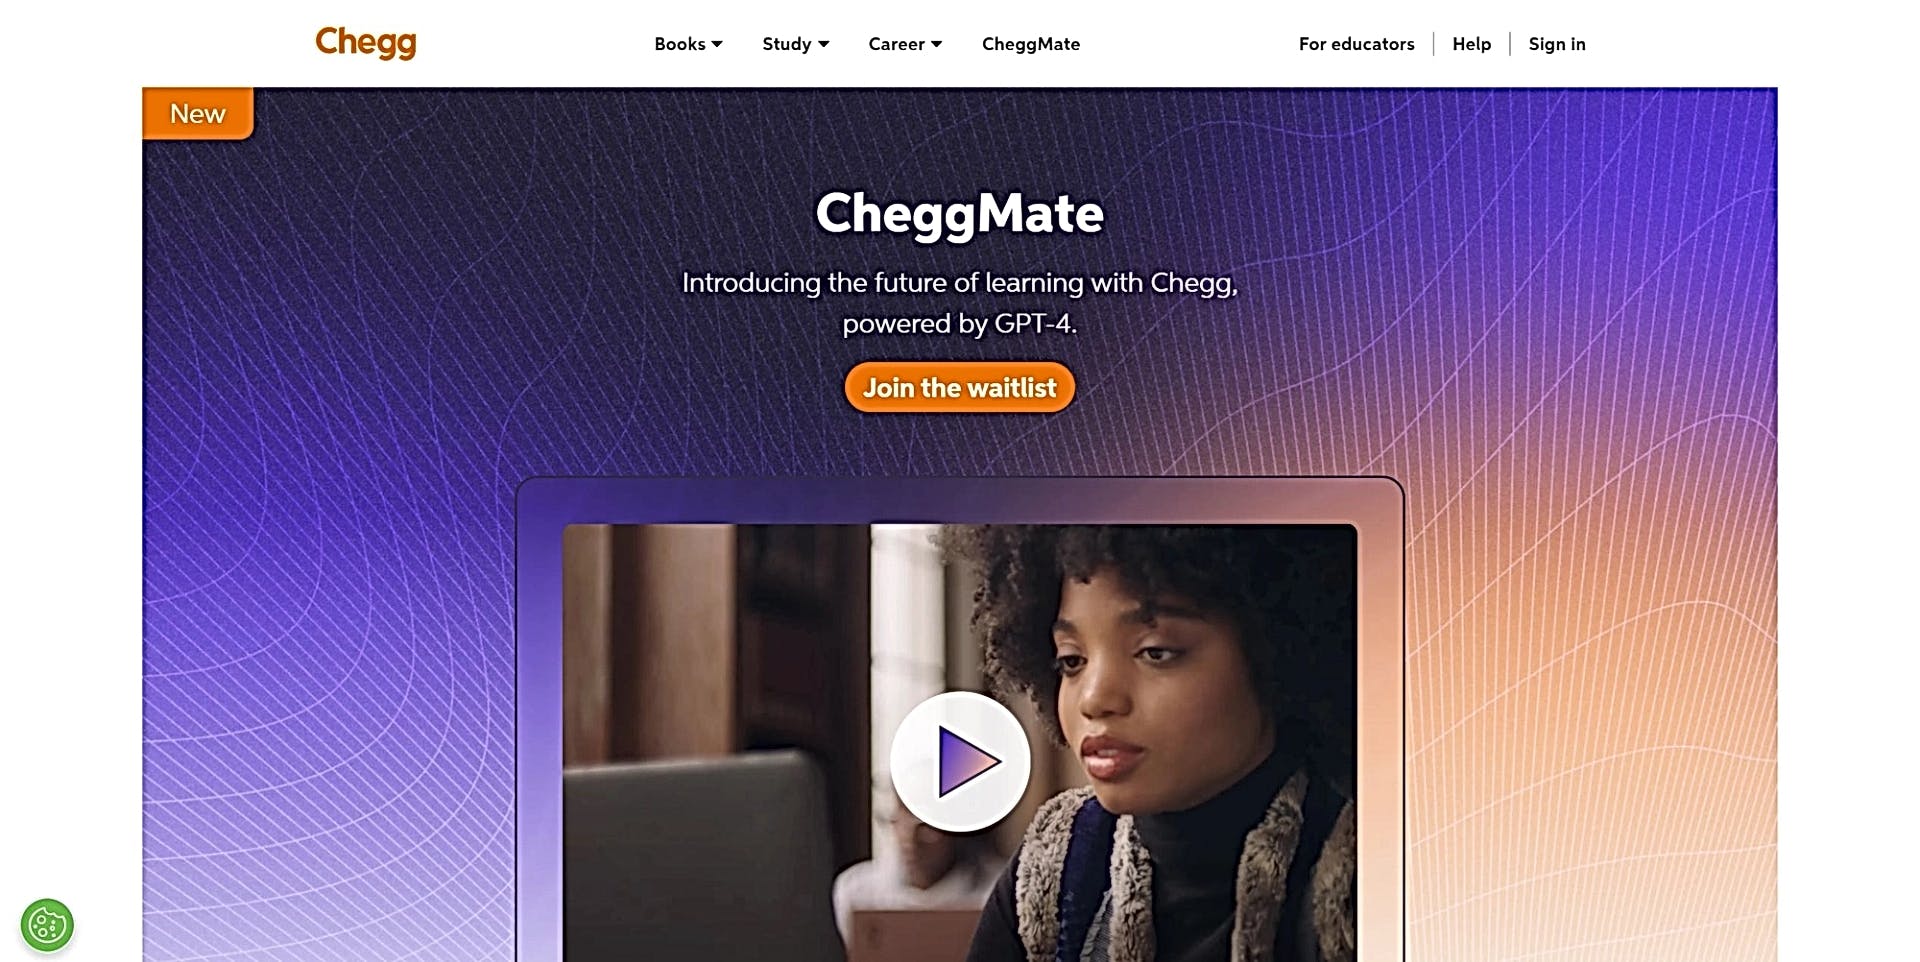 CheggMate featured